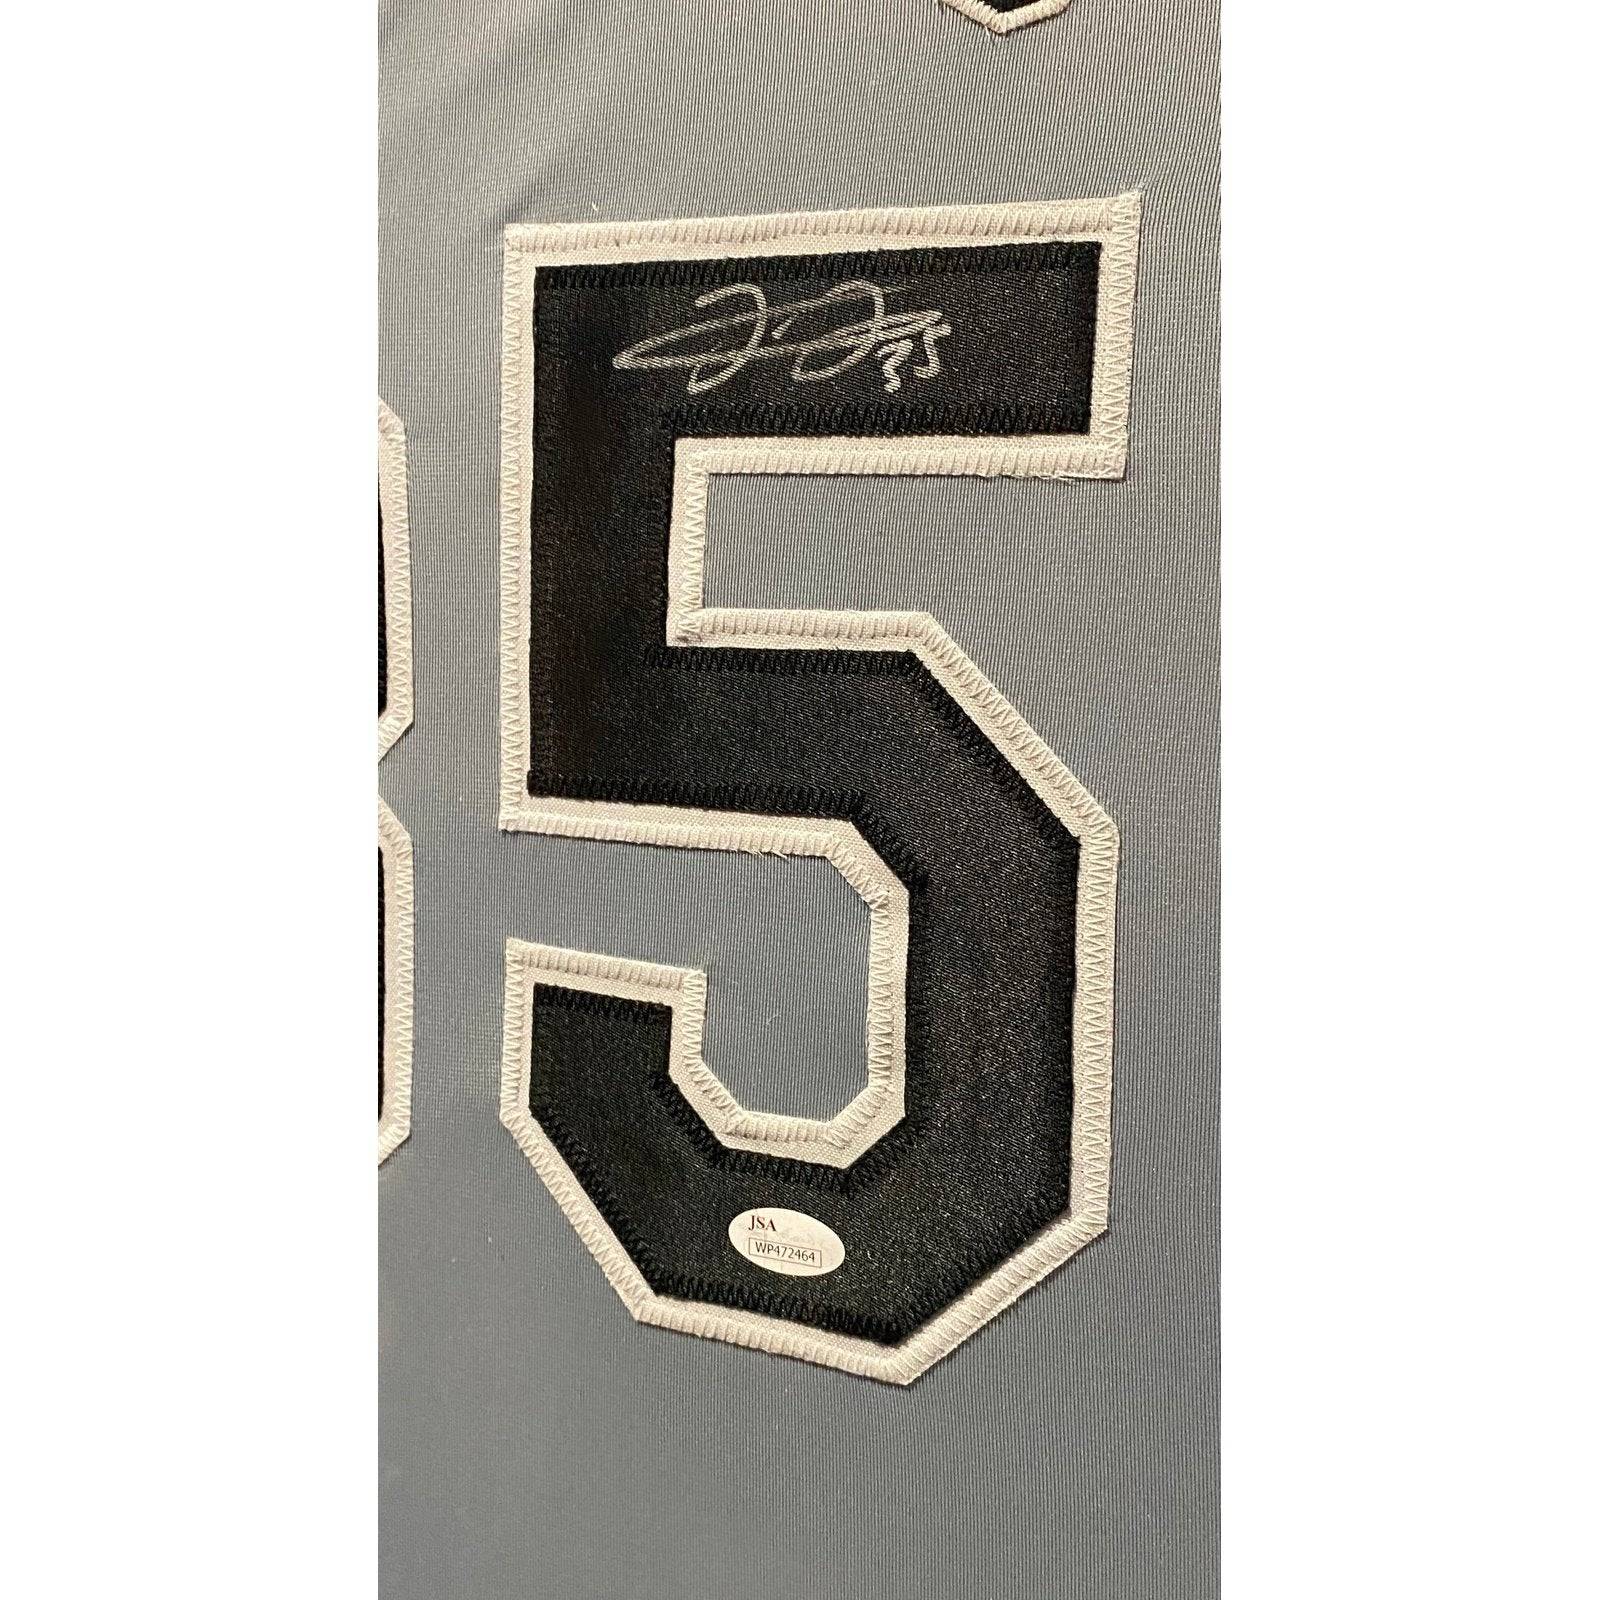 Frank Thomas Autographed and Framed Chicago White Sox Jersey